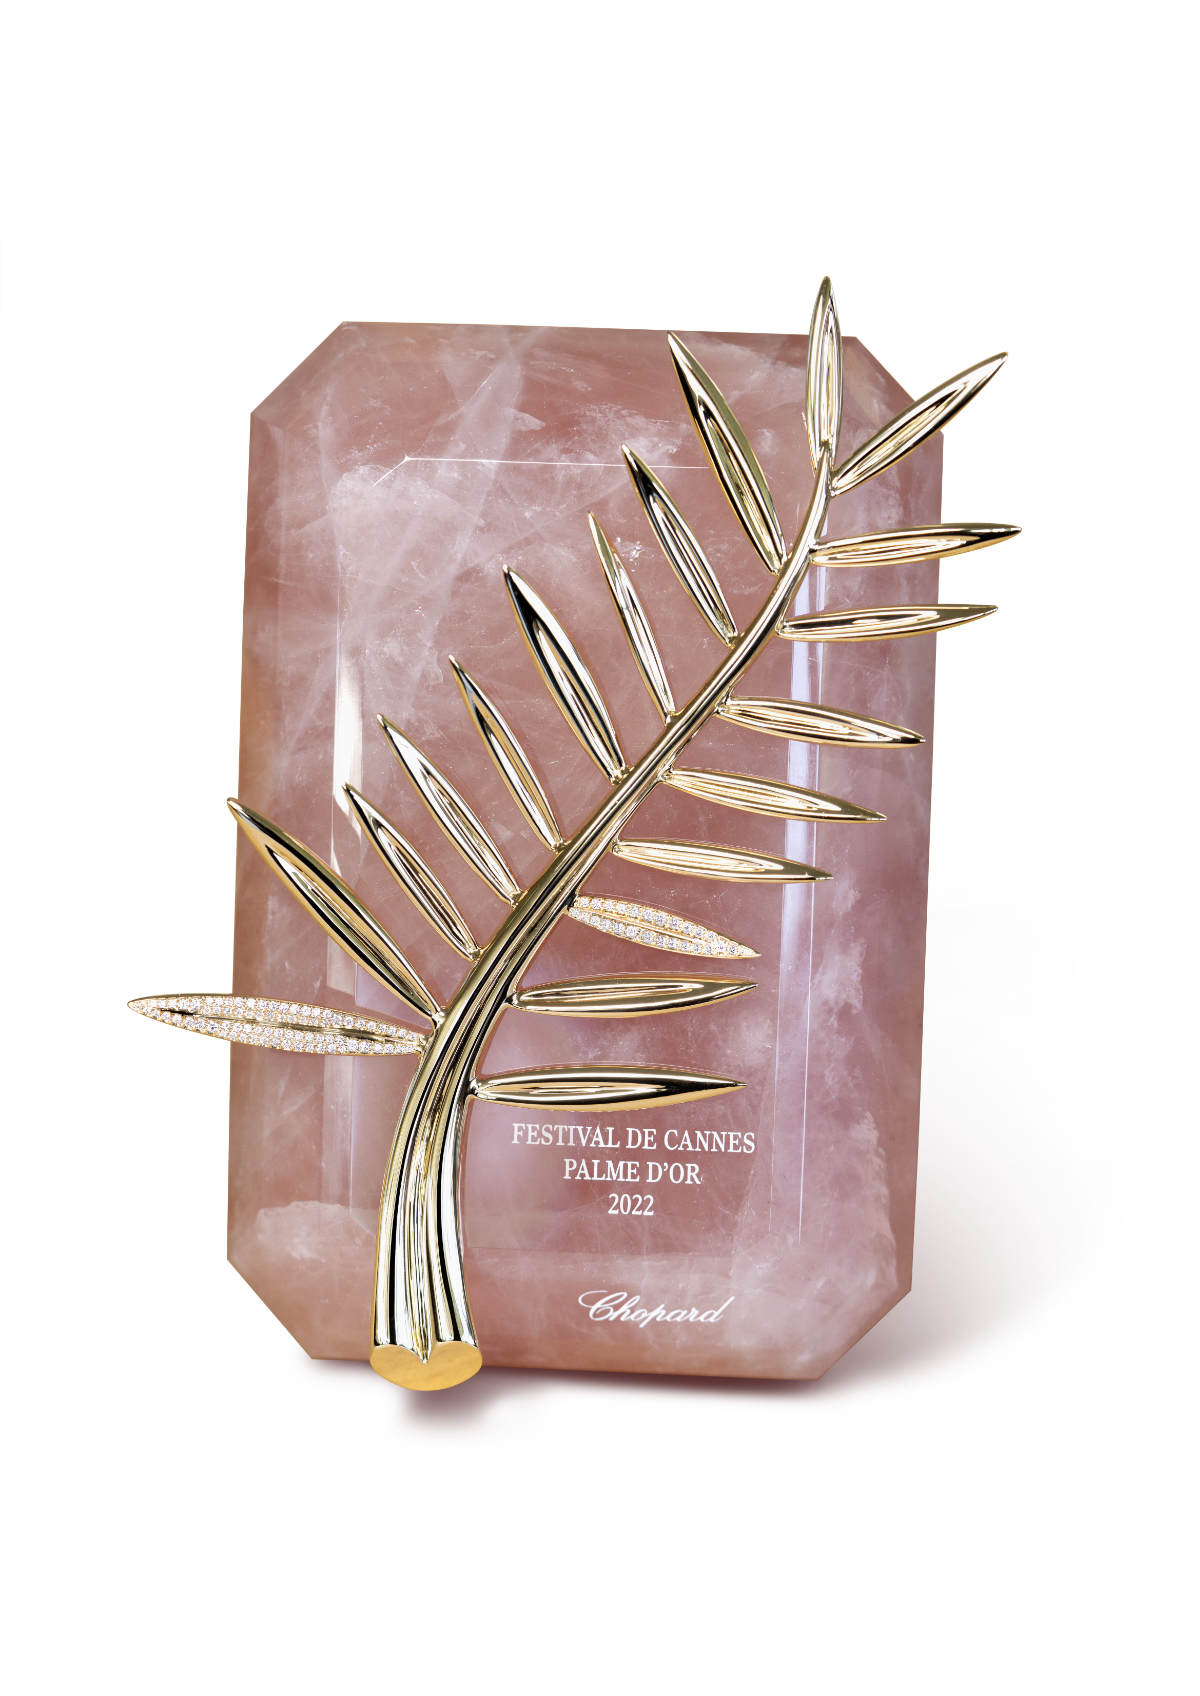 An Unprecedented Ethical Palme D'Or For The 75th Anniversary Of The Cannes Festival